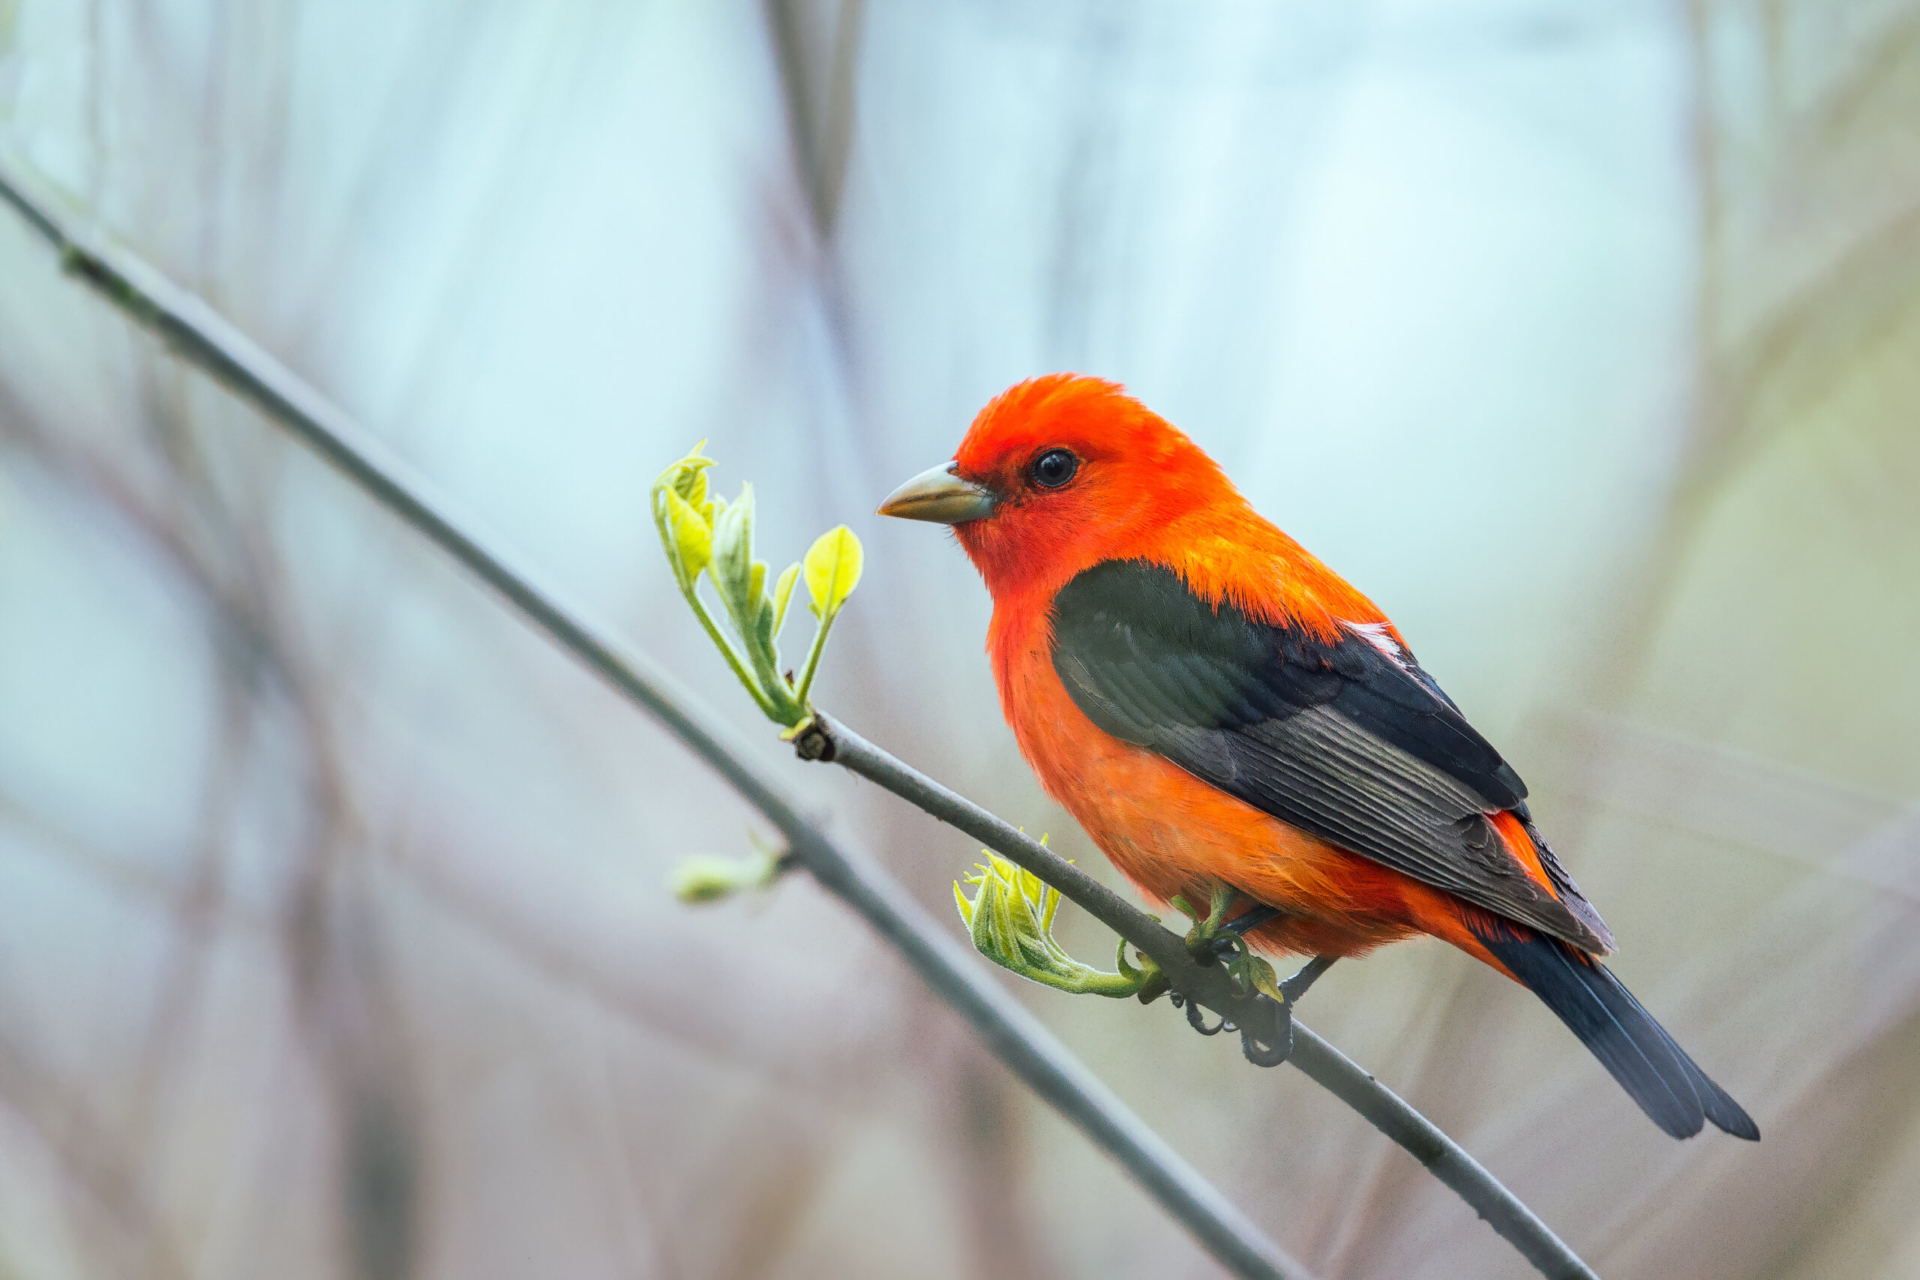 A Scarlet Tanager sitting on a tree branch in spring.